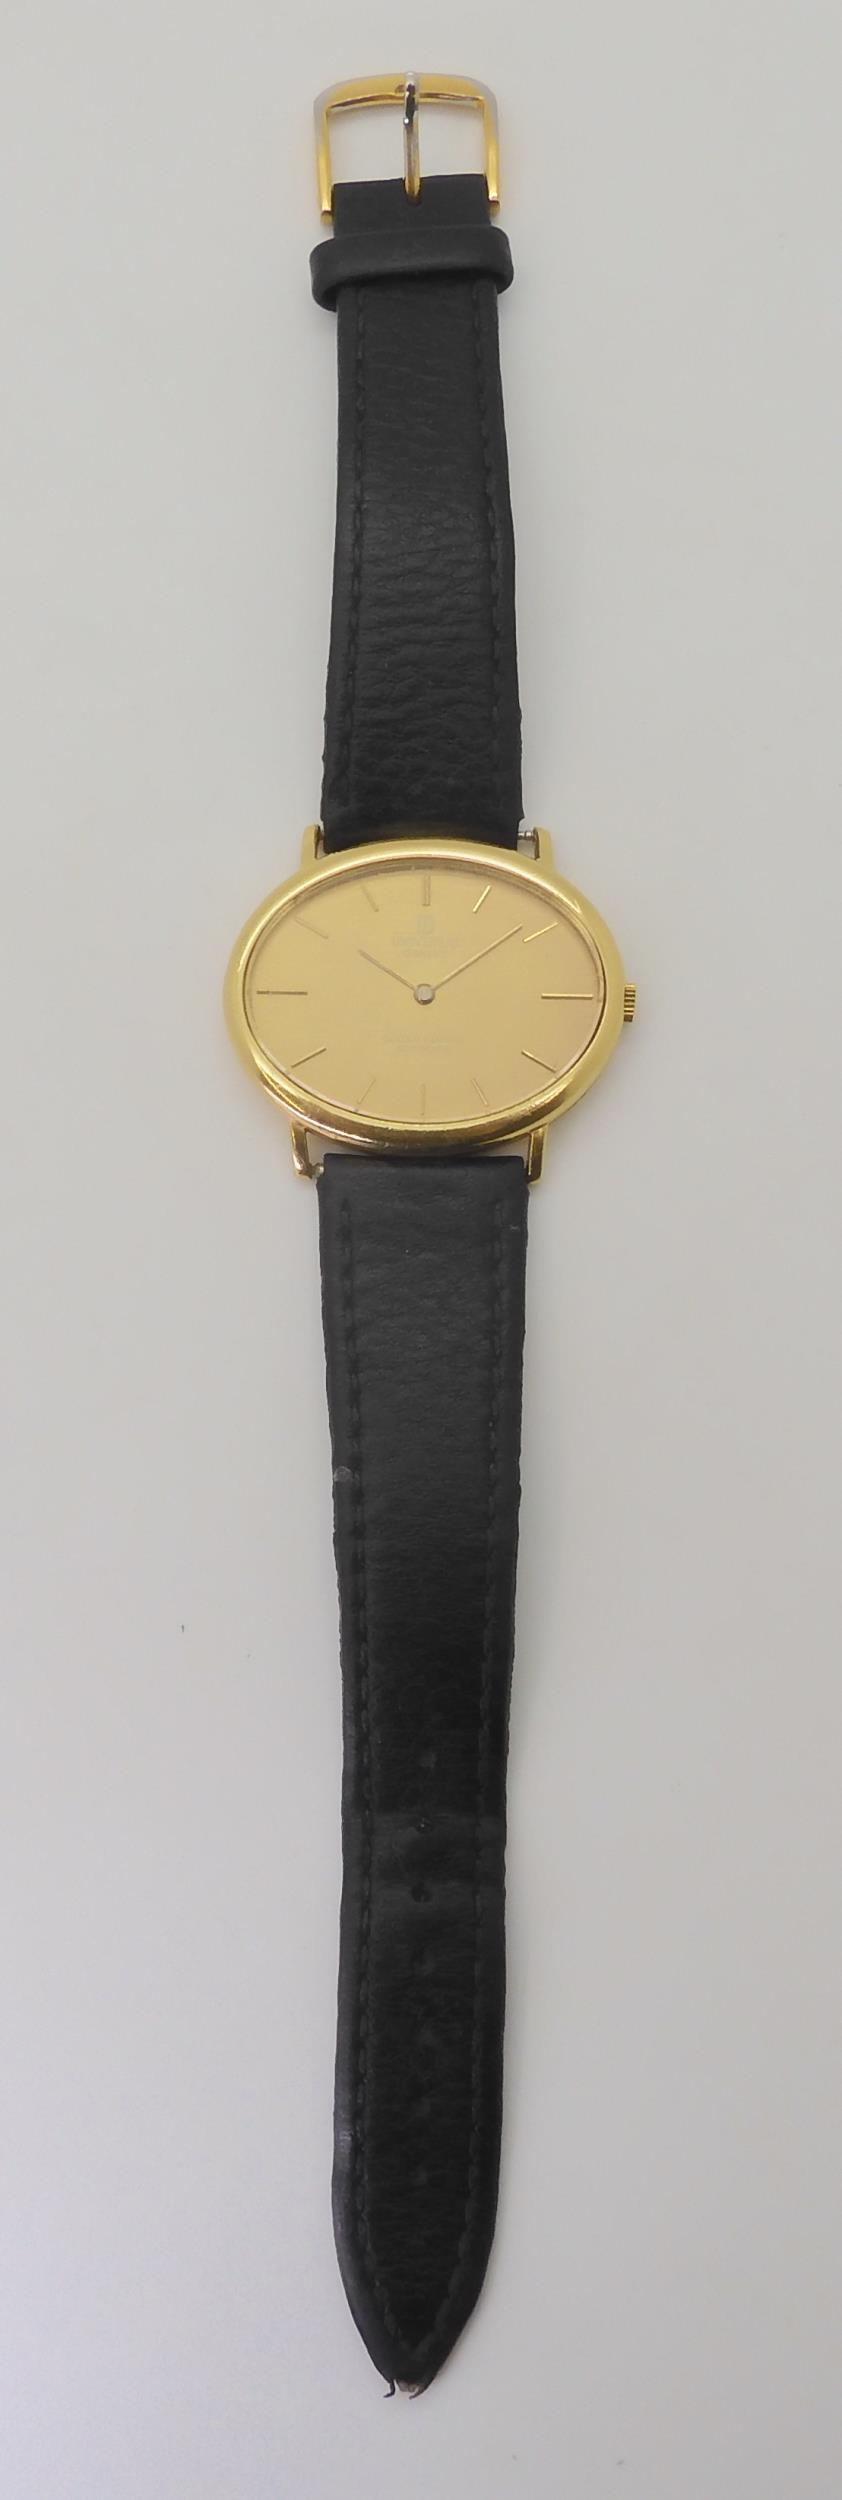 A UNIVERSAL GENEVE GOLDEN SHADOW  with an automatic movement, the case in 18ct gold with Swiss - Image 2 of 6